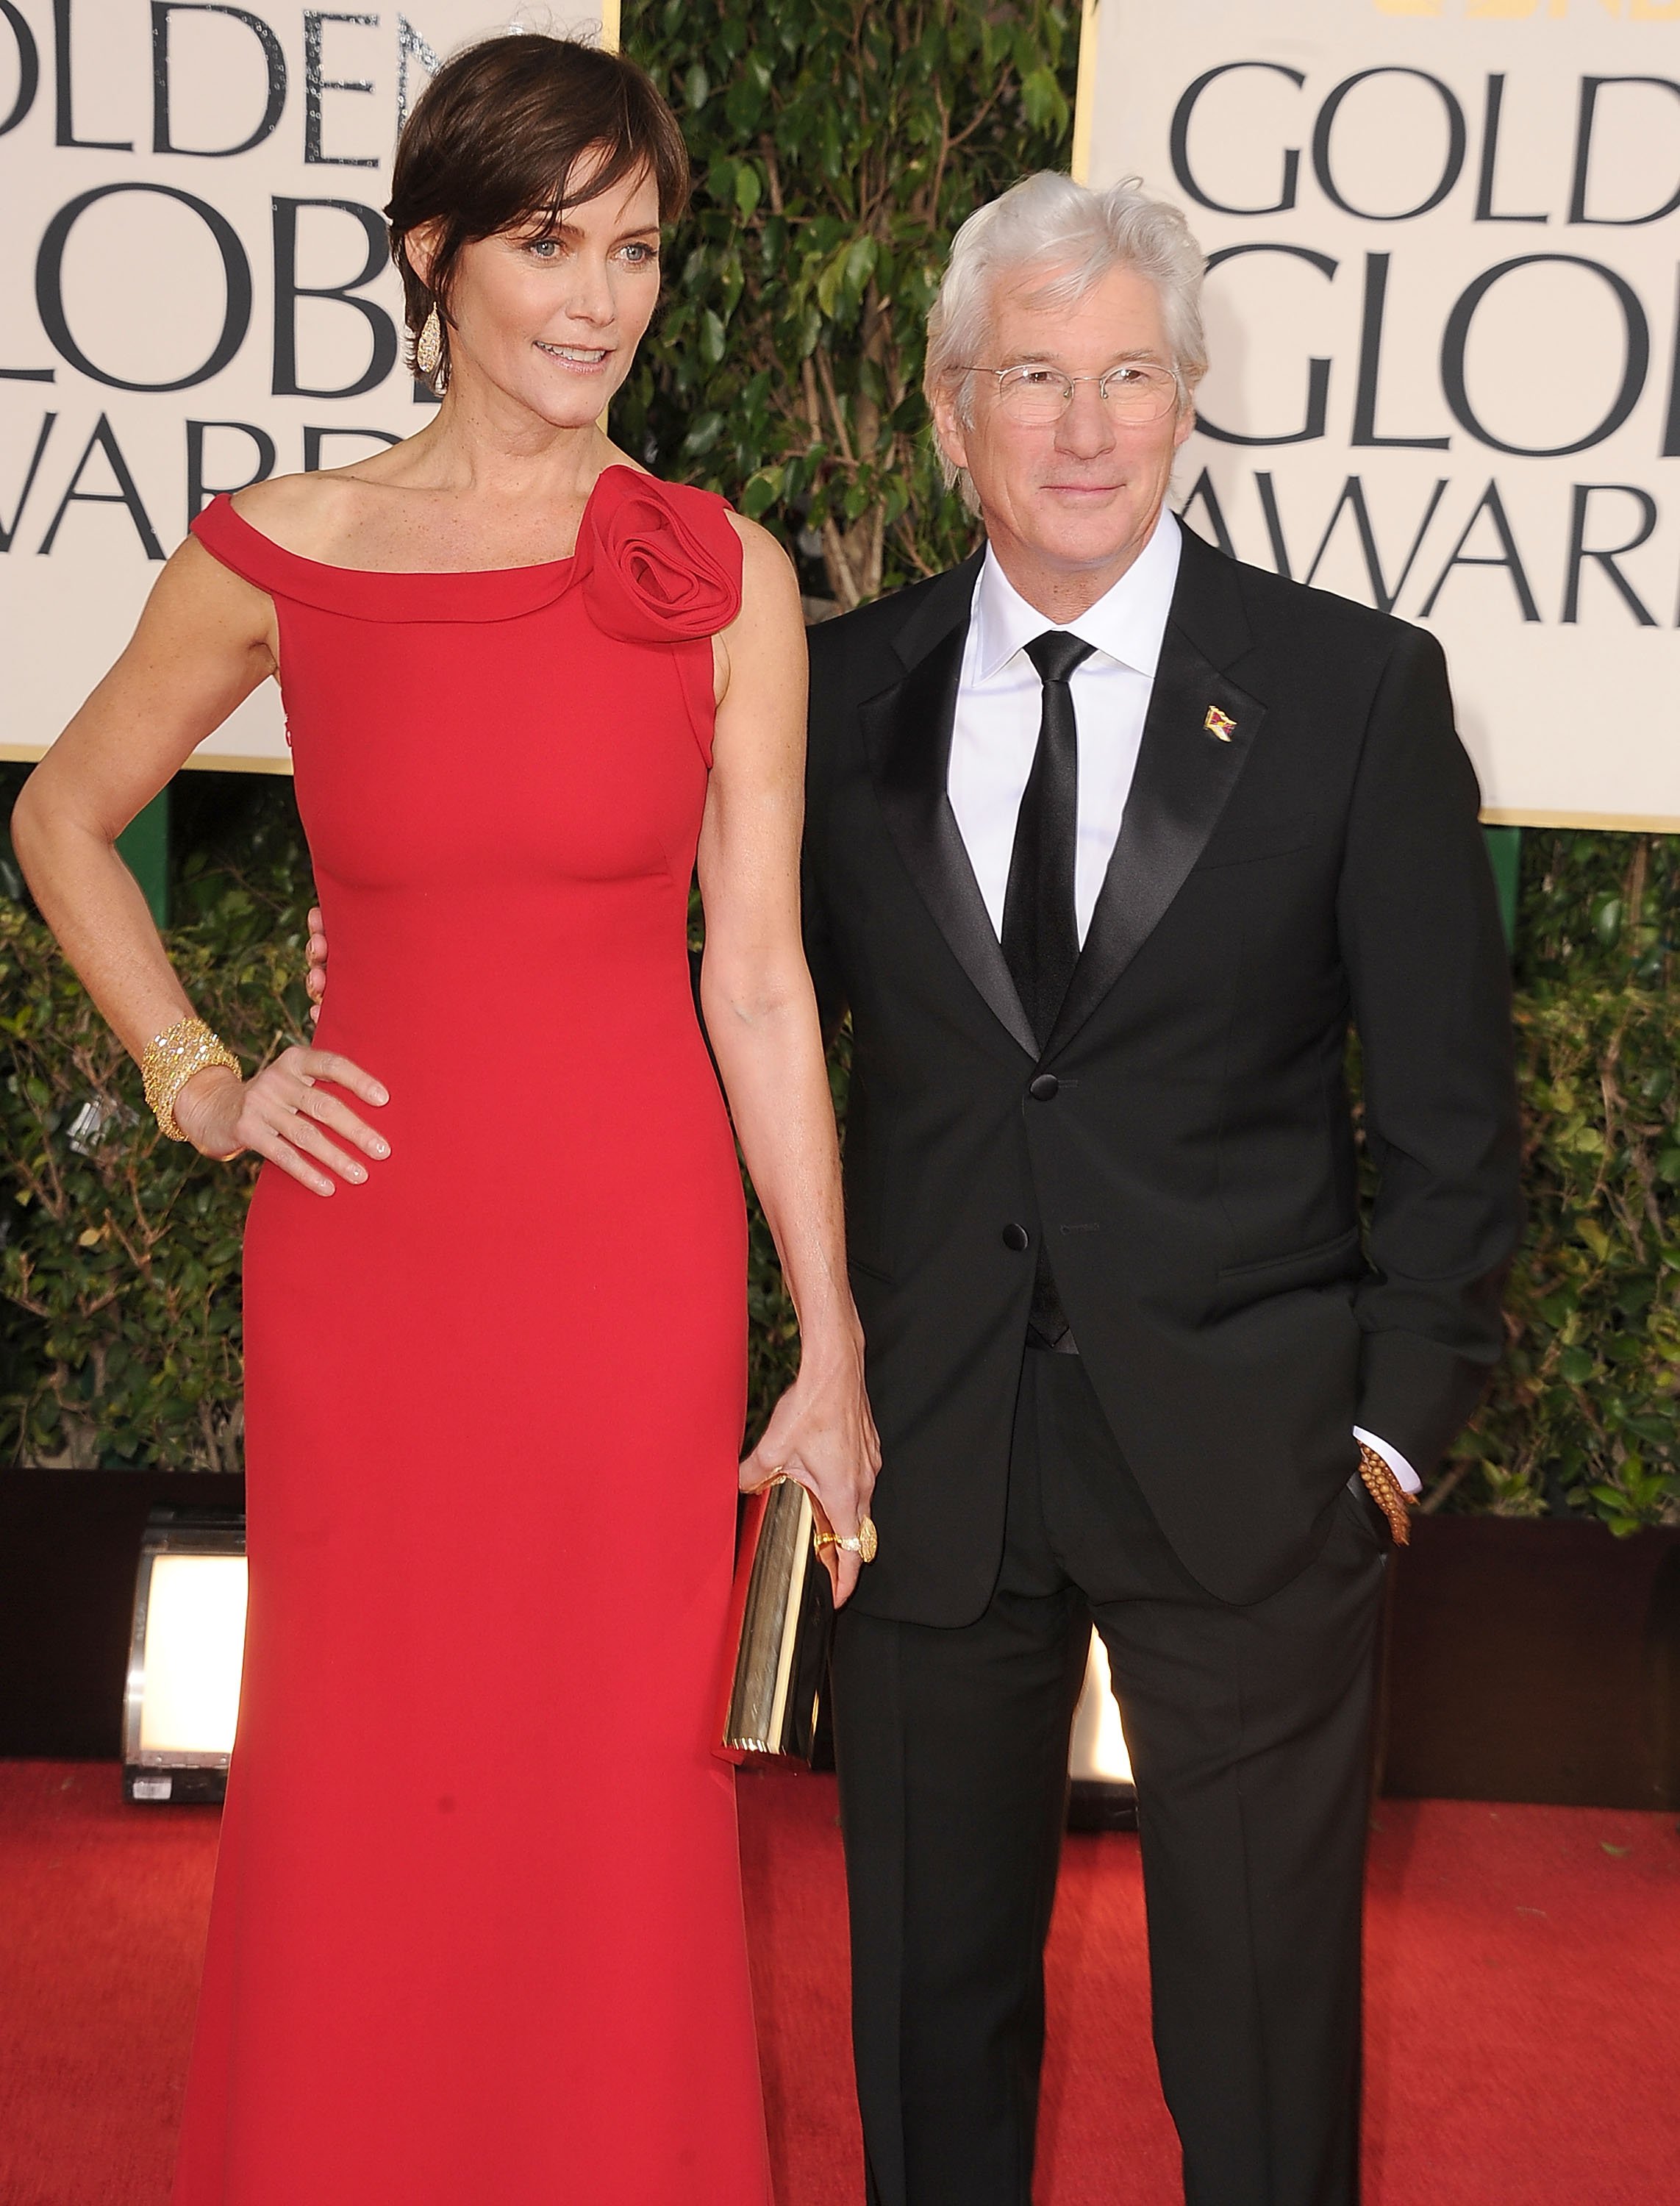 Carey Lowell and Richard Gere at the 70th Annual Golden Globe Awards on January 13, 2013, in Beverly Hills, California | Source: Getty Images